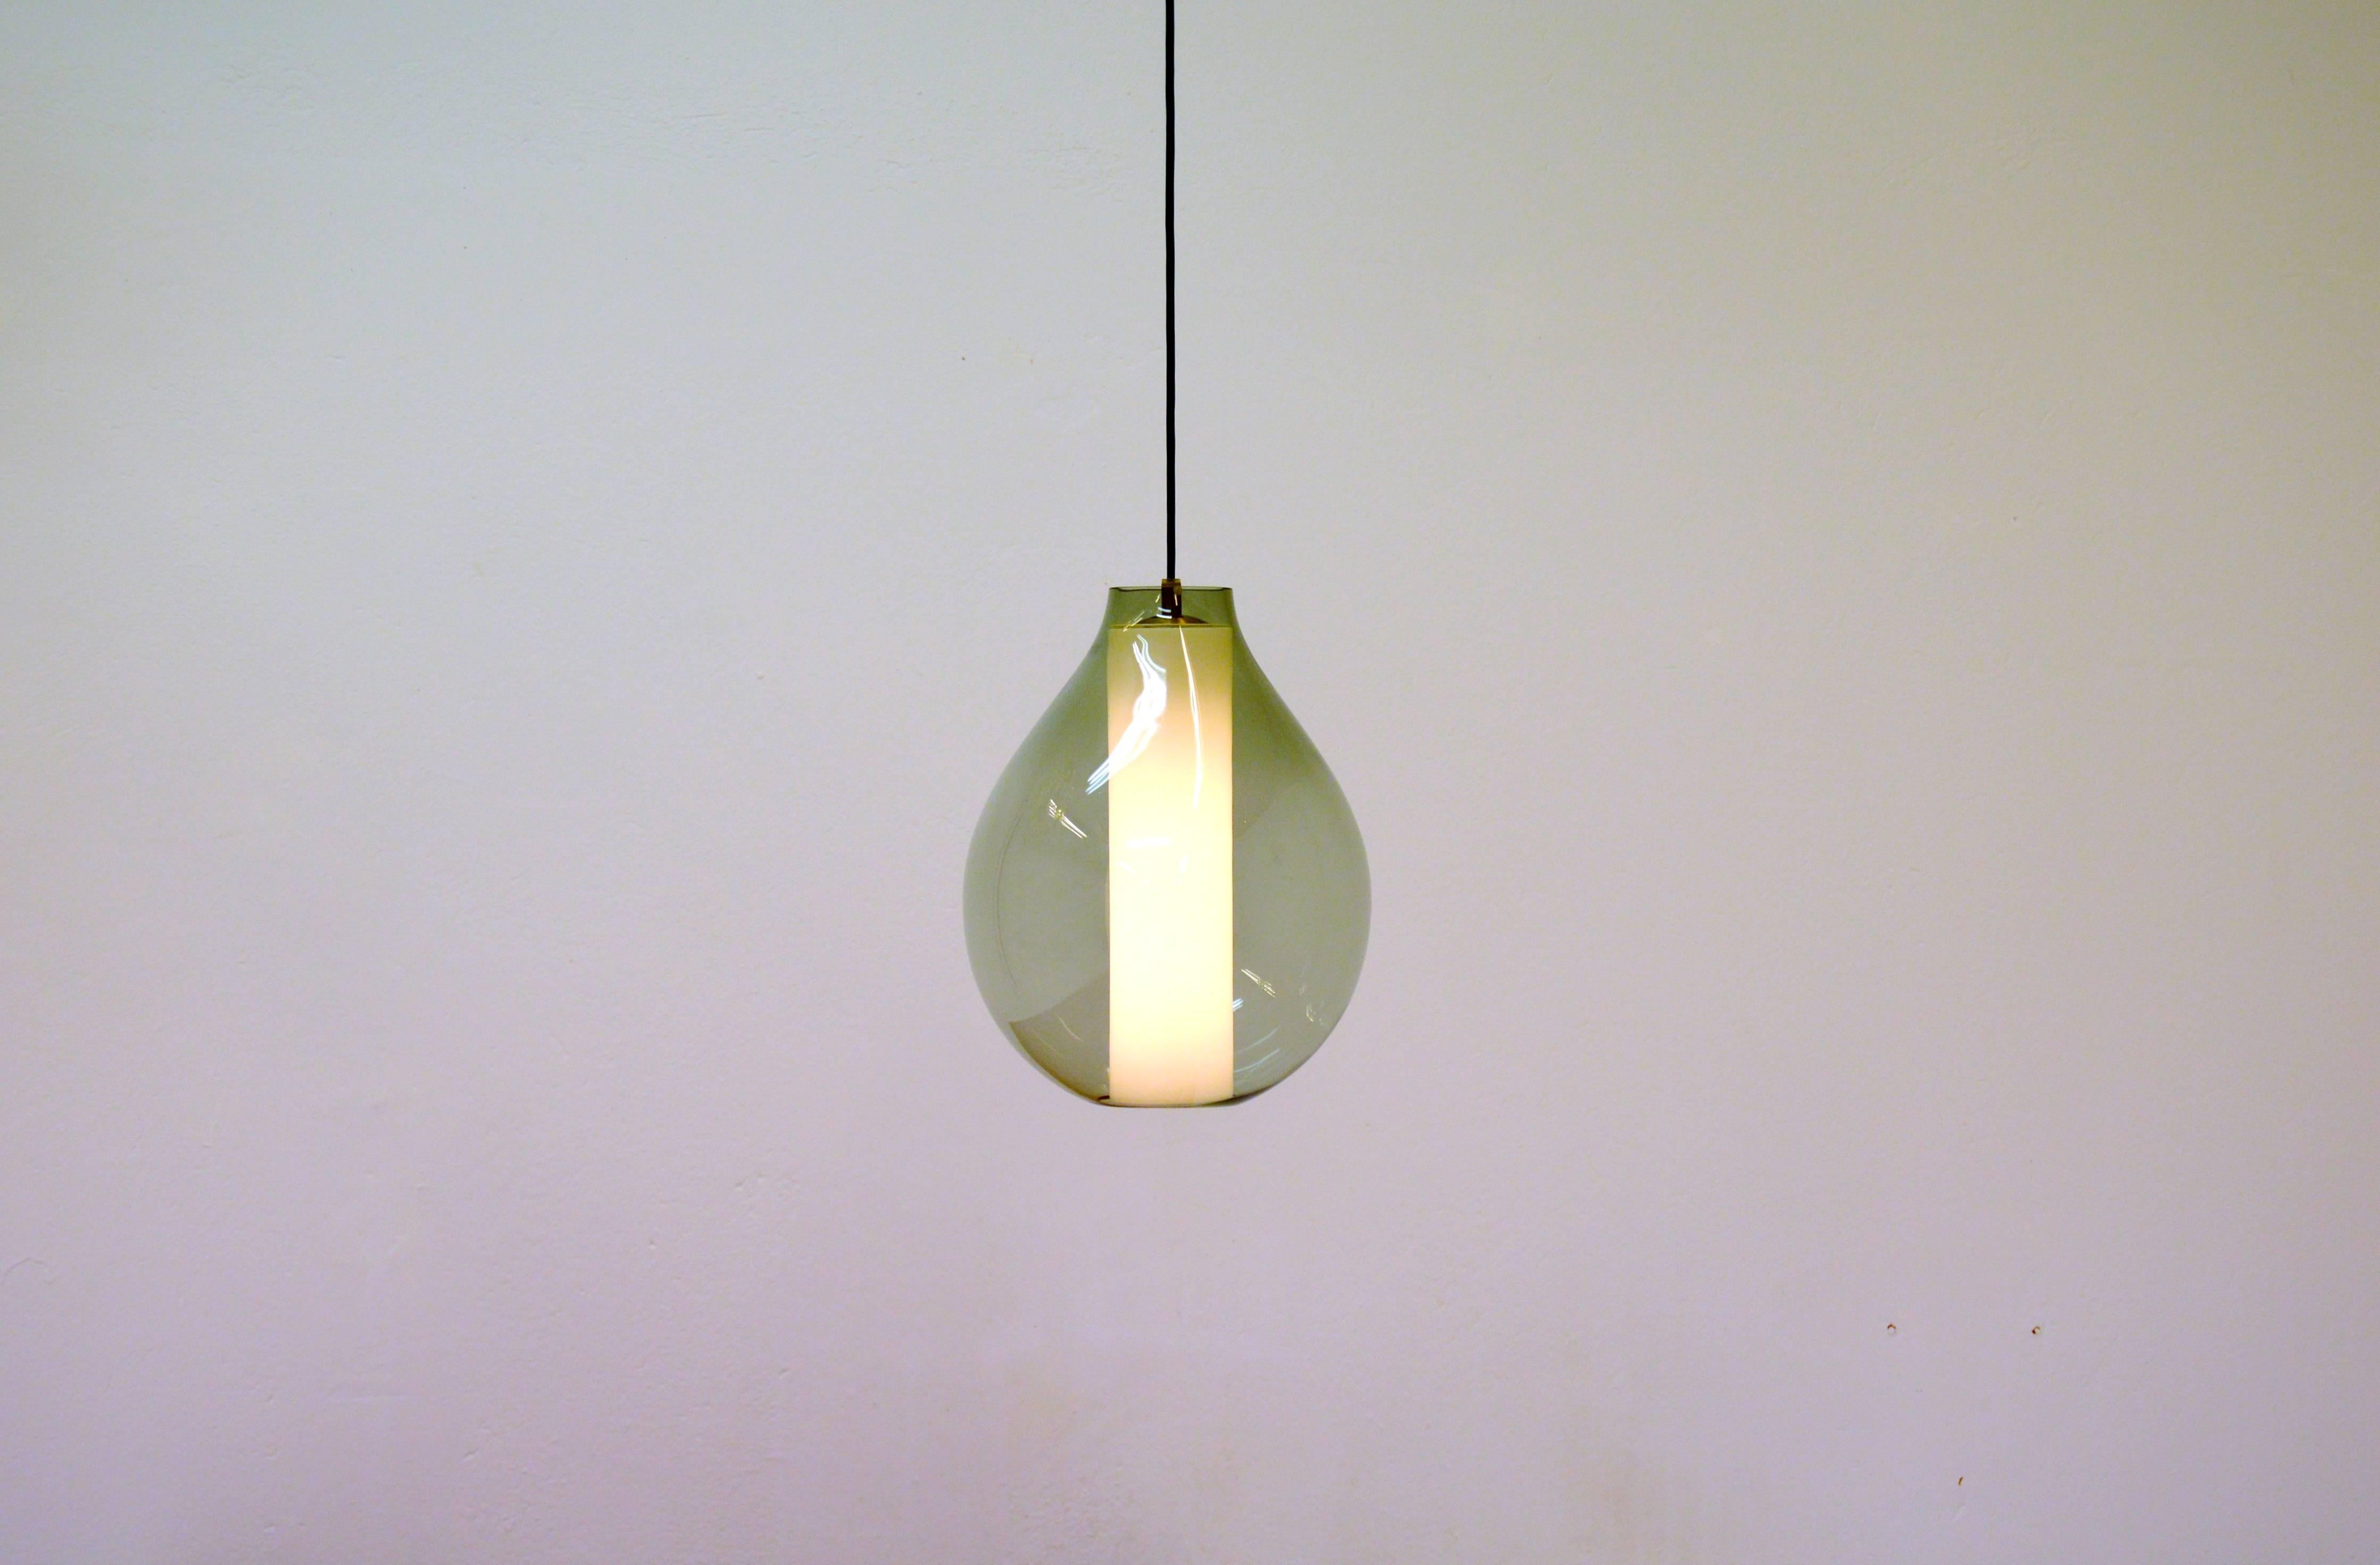 Very rare drop shaped ceiling light or pendant from Orrefors. Designed by Carl Fagerlund in the 1950s. Light green toned dropshaped glass with a white cylinderglass inside.

Existing and working european wiring, E27 socket.
The stated dimensions